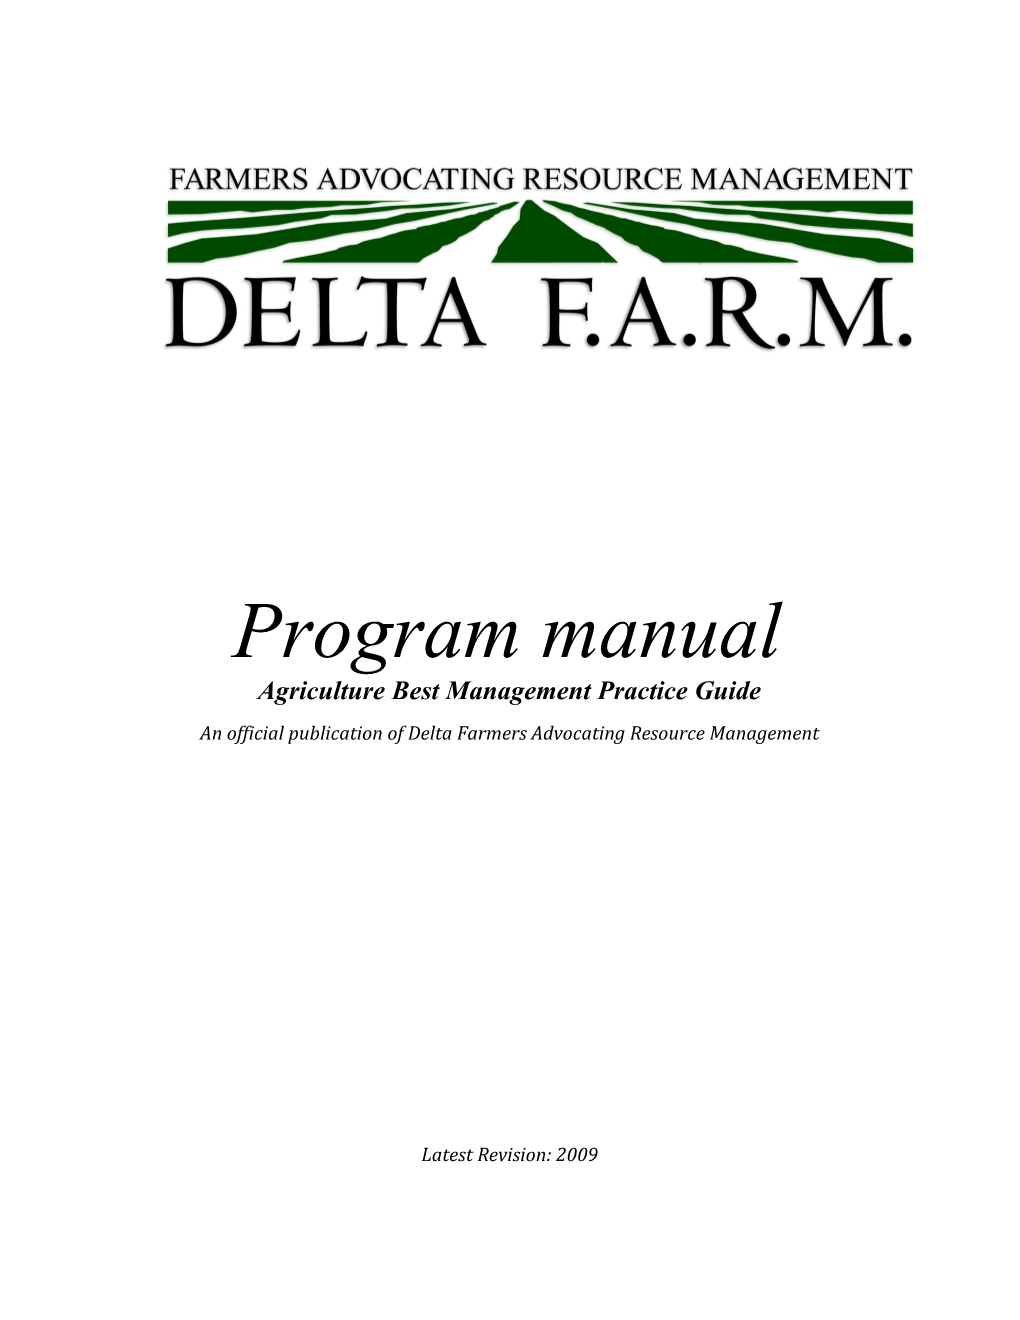 Agriculture Best Management Practice Guide